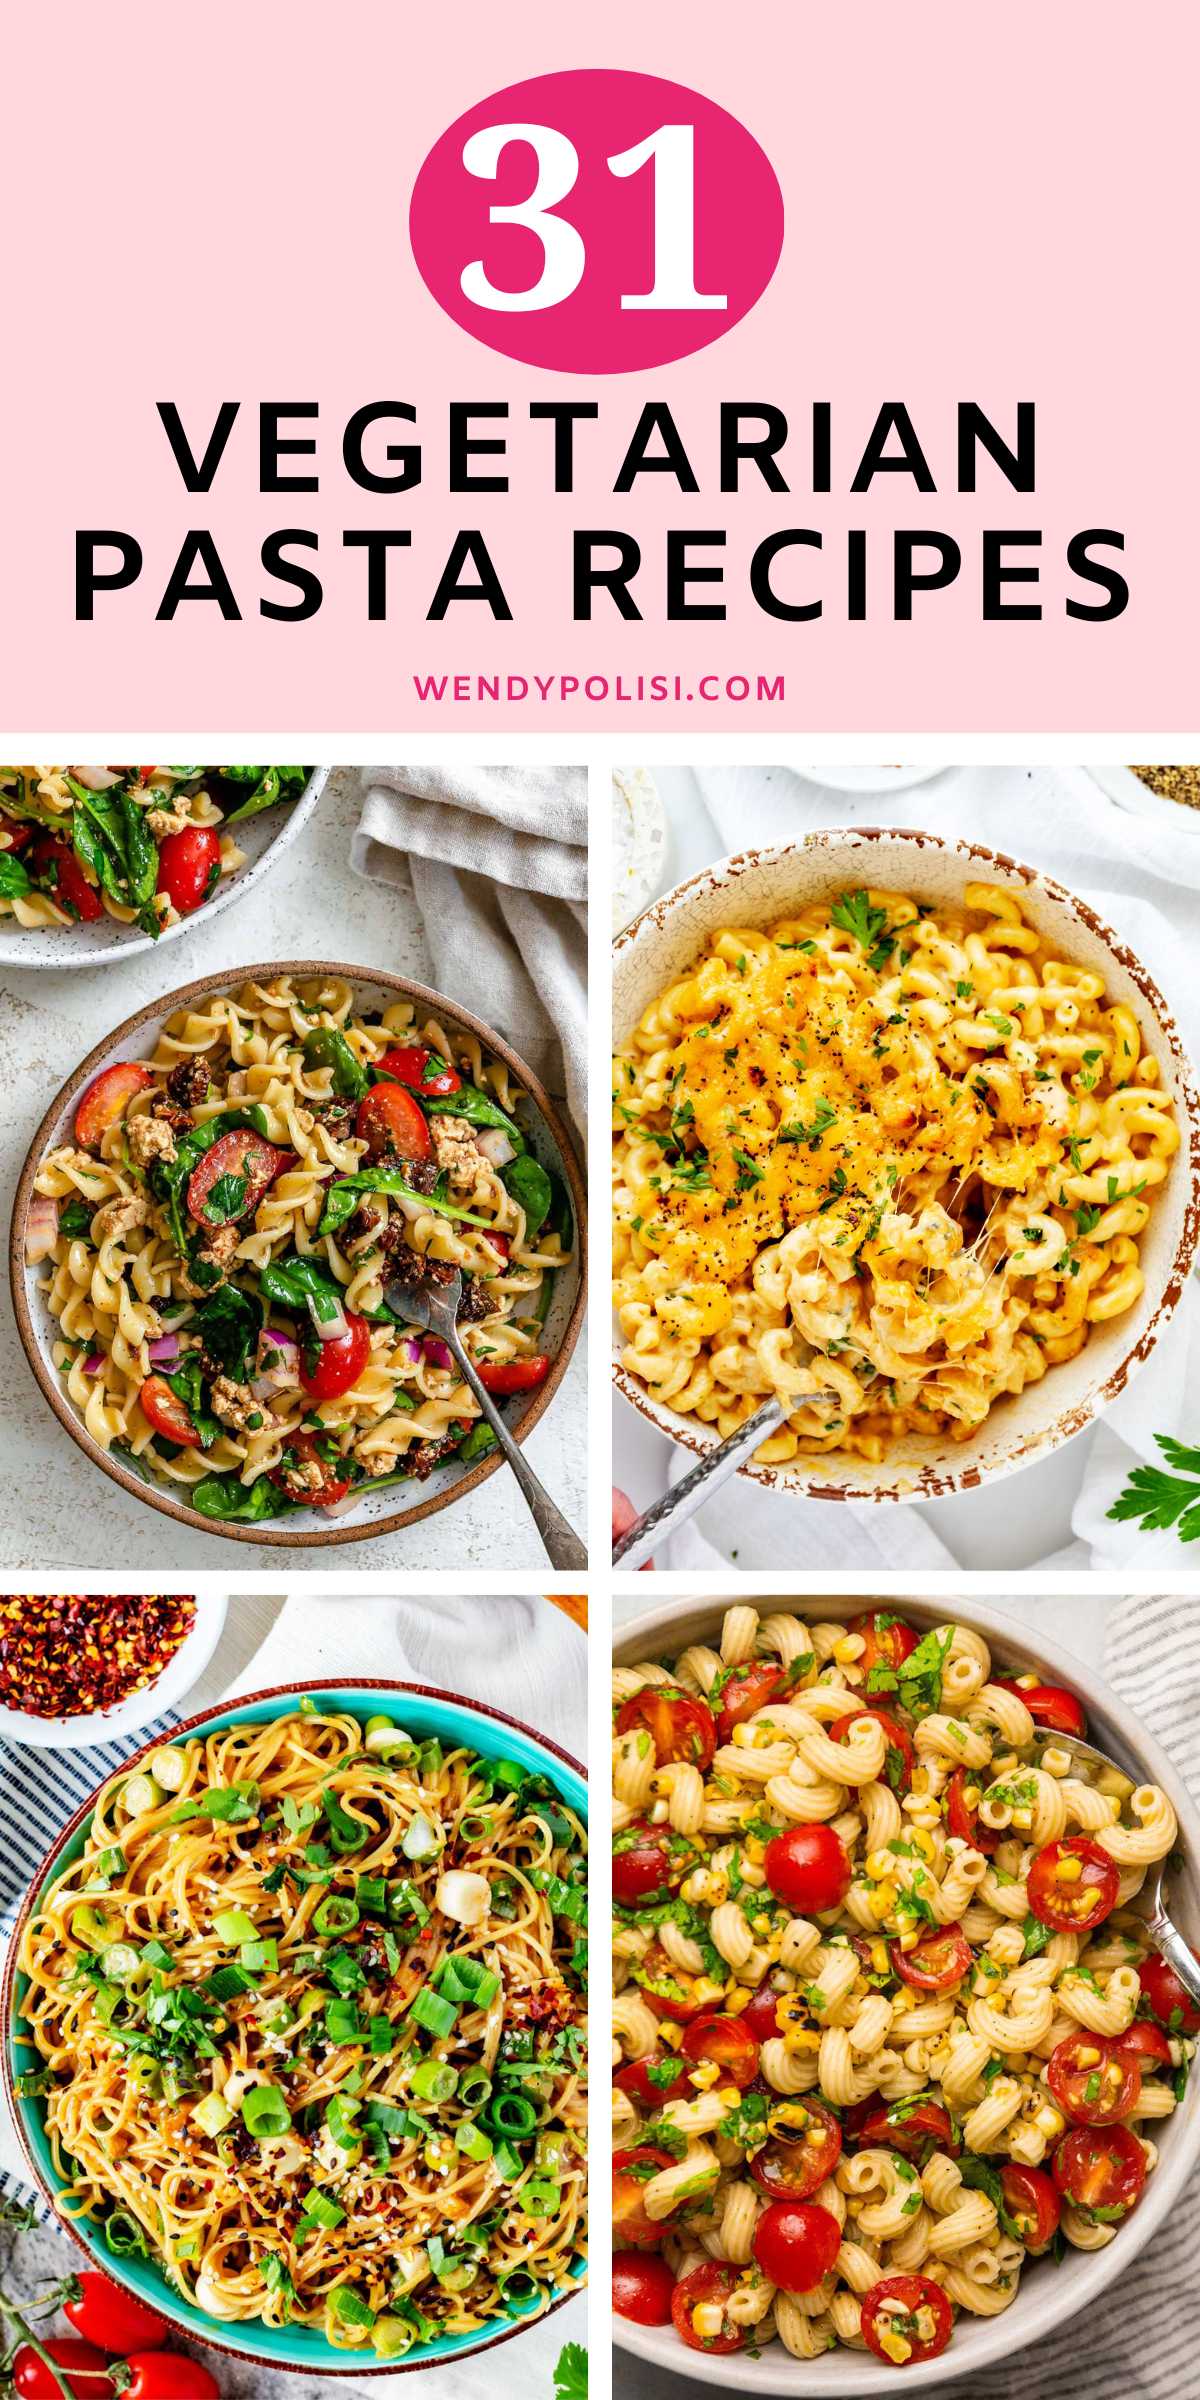 Four photos of vegetarian pasta with the text 31 Vegetarian Pasta Recipes above.